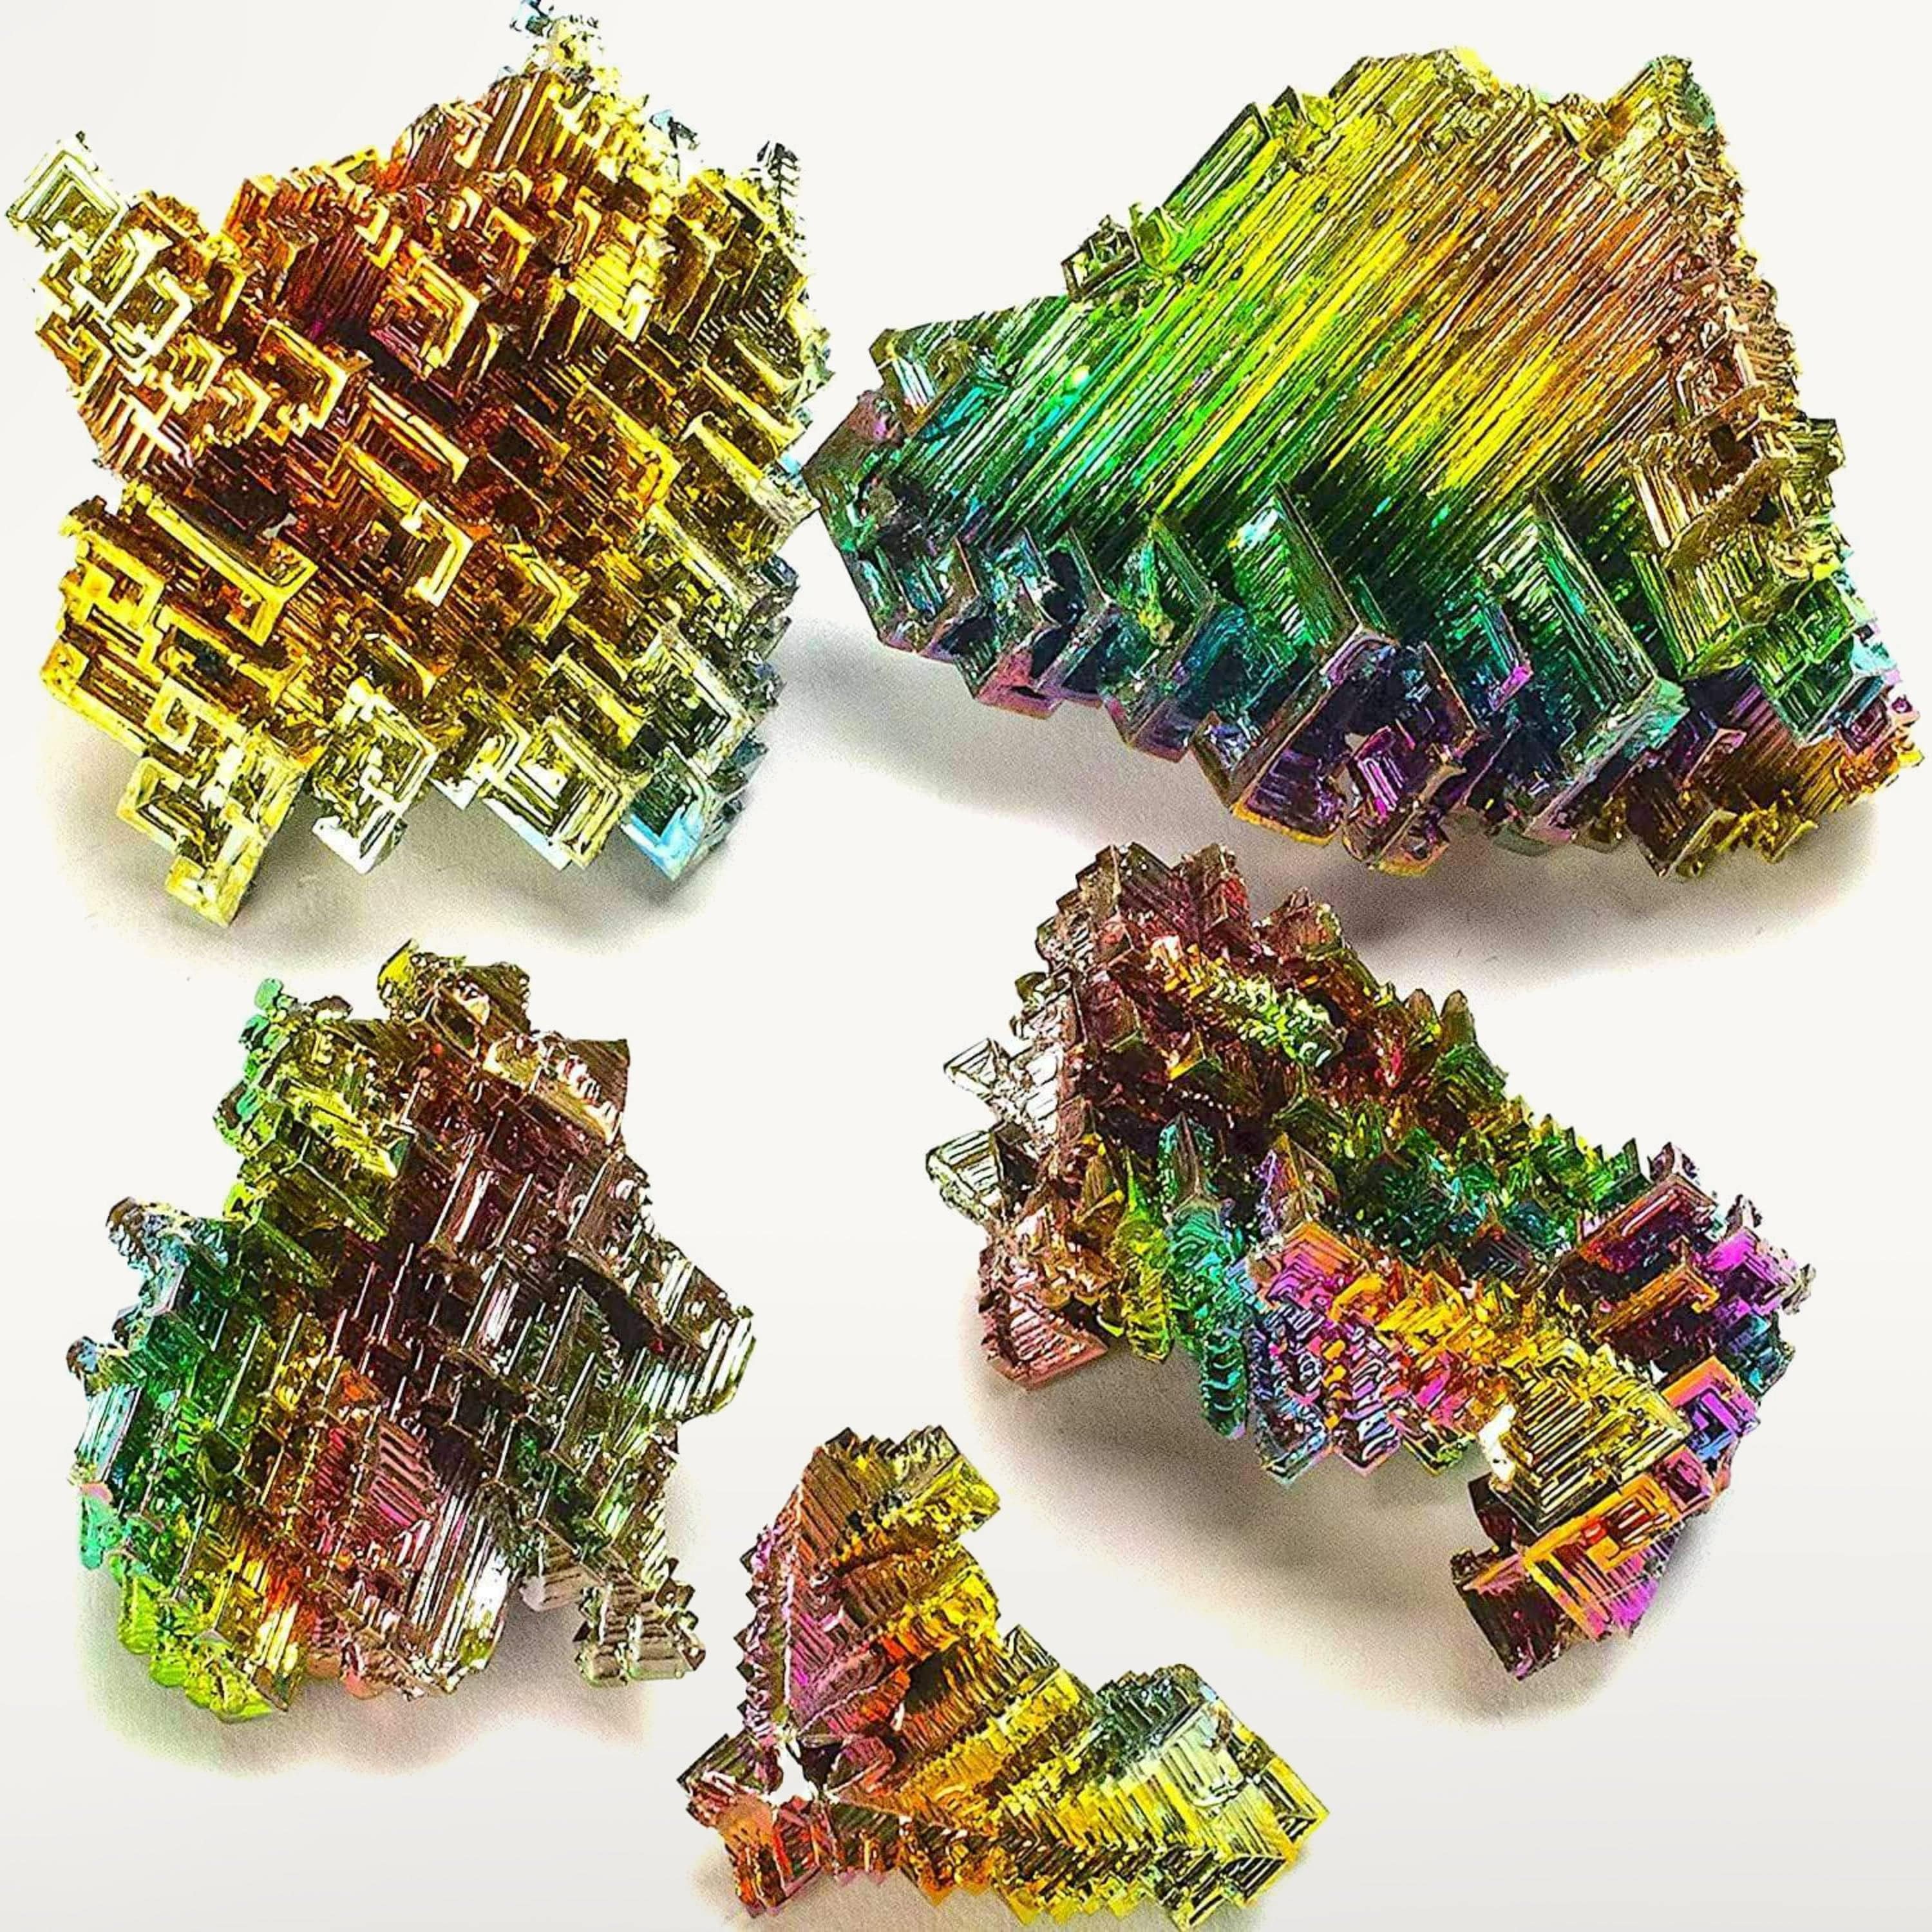 Kalifano Fossils & Minerals Bismuth Bundle 500 carats inside collectors glass box B79